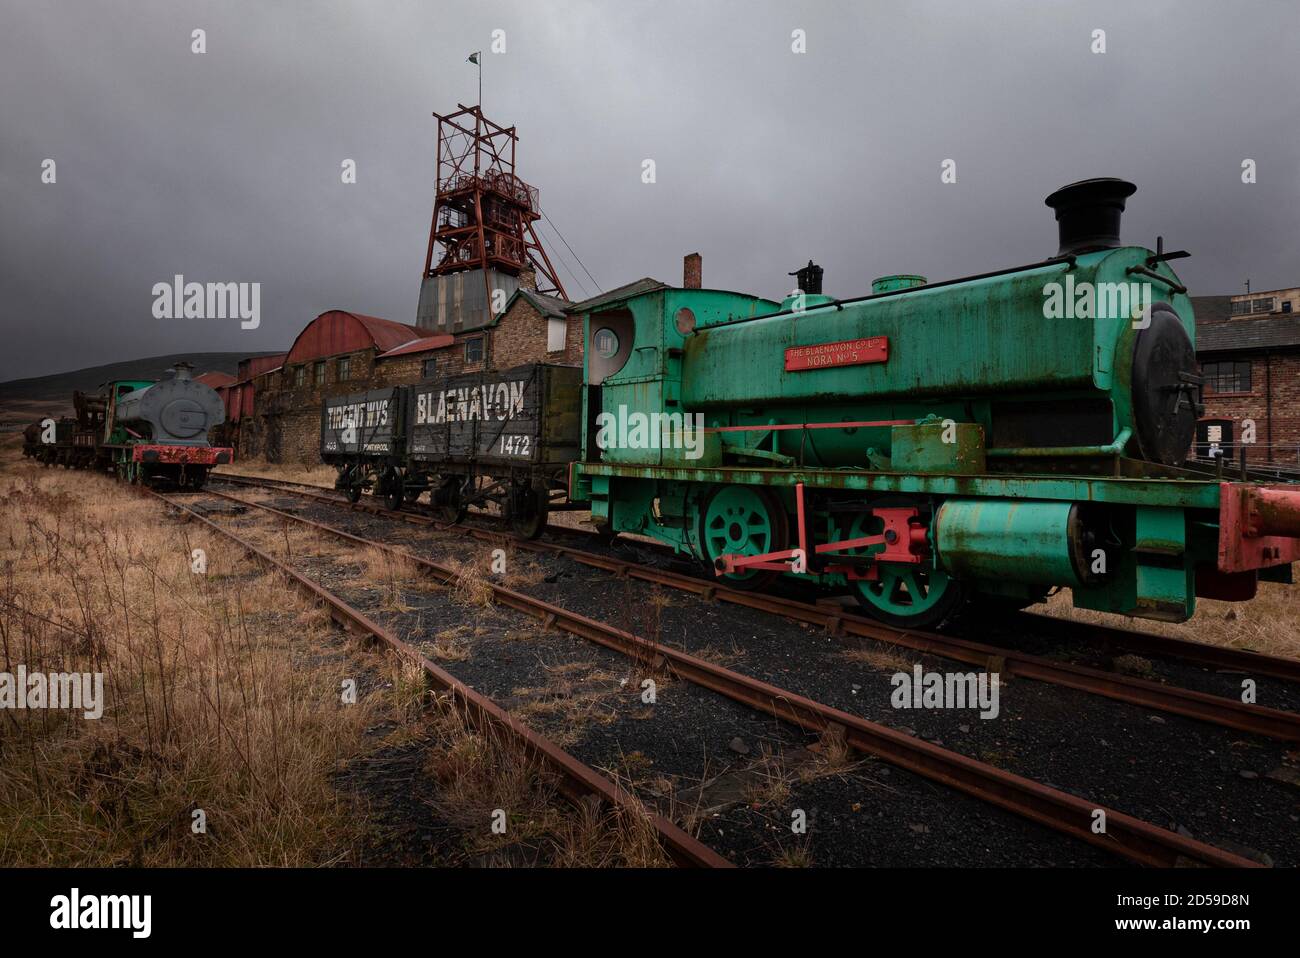 Railway engine and trucks at Big Pit, former coal mine at the UNESCO World Heritage Site, Blaenavon Industrial Landscape, South Wales, United Kingdom Stock Photo